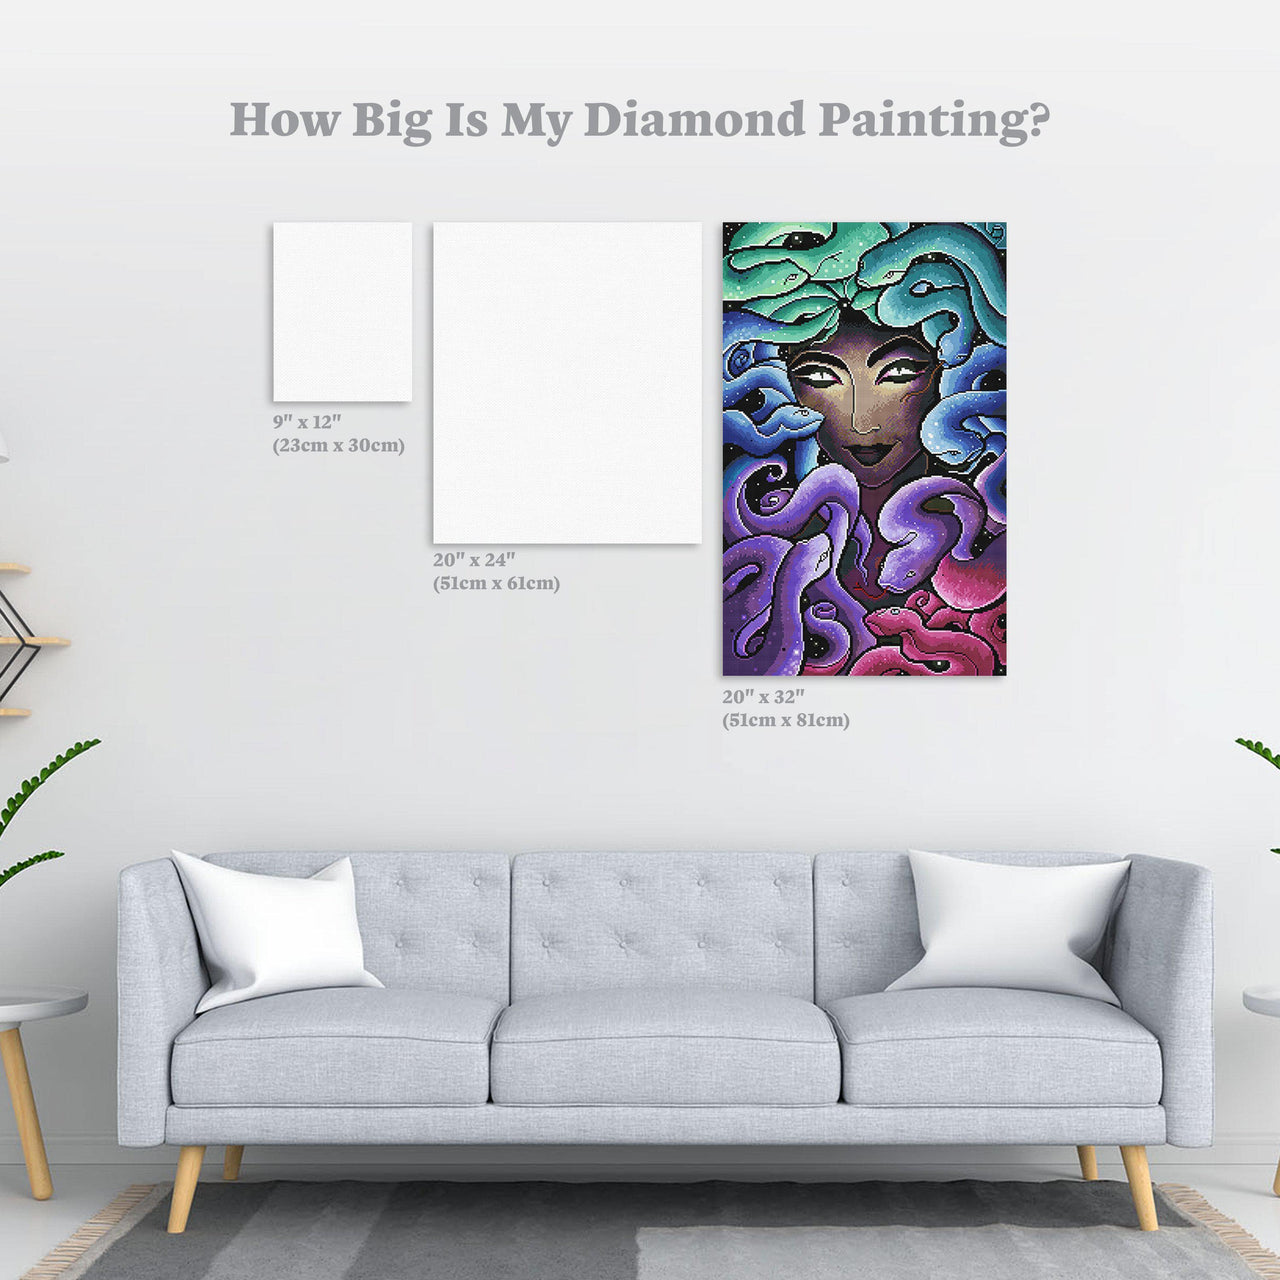 Diamond Painting Medusa (final edition) 20" x 32″ (51cm x 81cm) / Round with 46 Colors including 3 ABs / 52,490